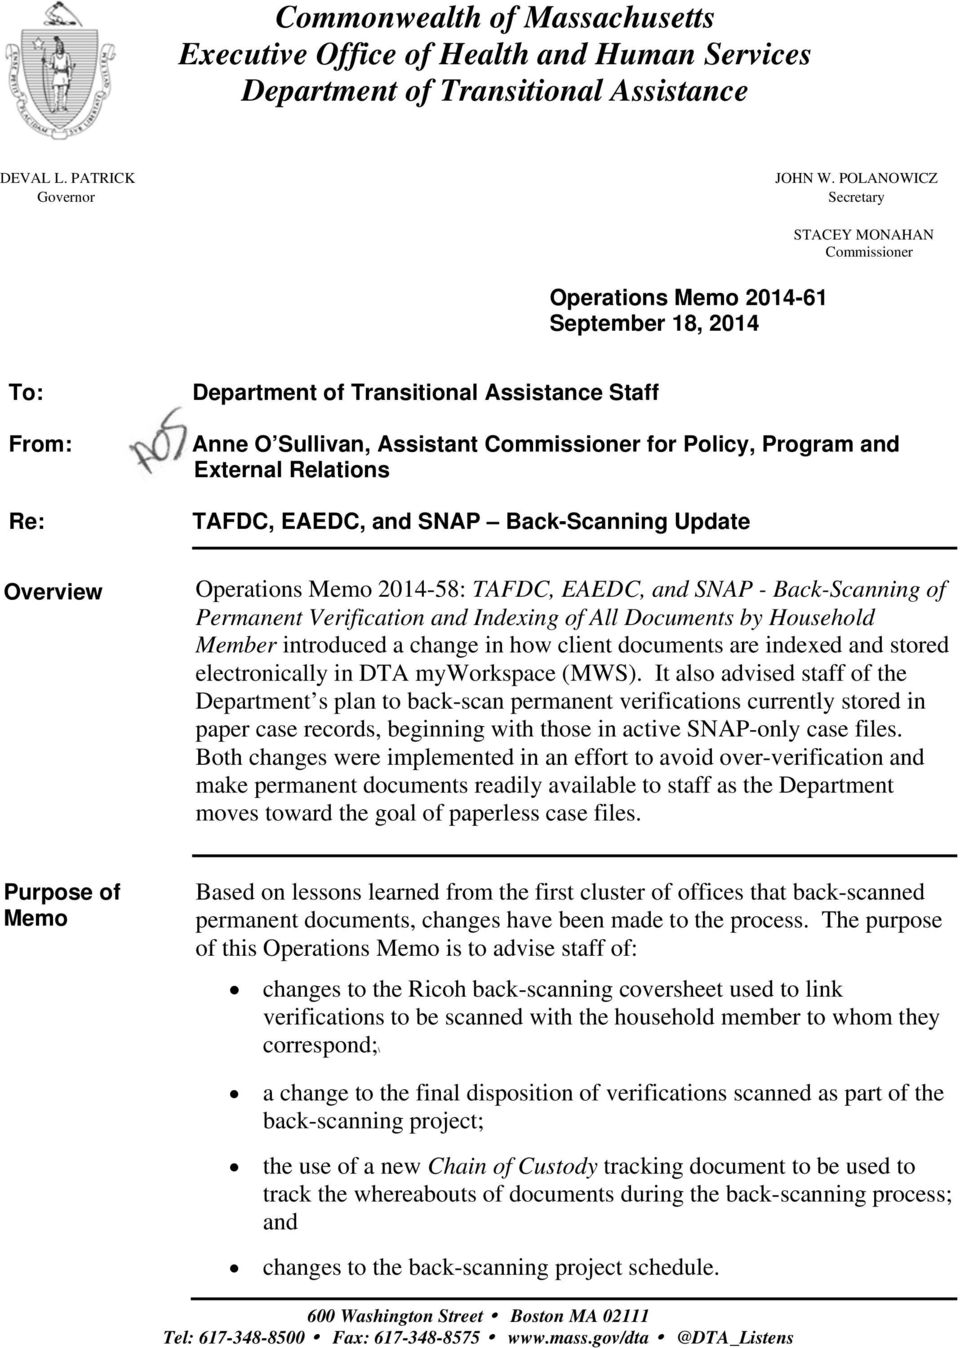 Commonwealth Of Massachusetts Executive Office Of Health And Human Services Department Of Transitional Assistance Pdf Free Download